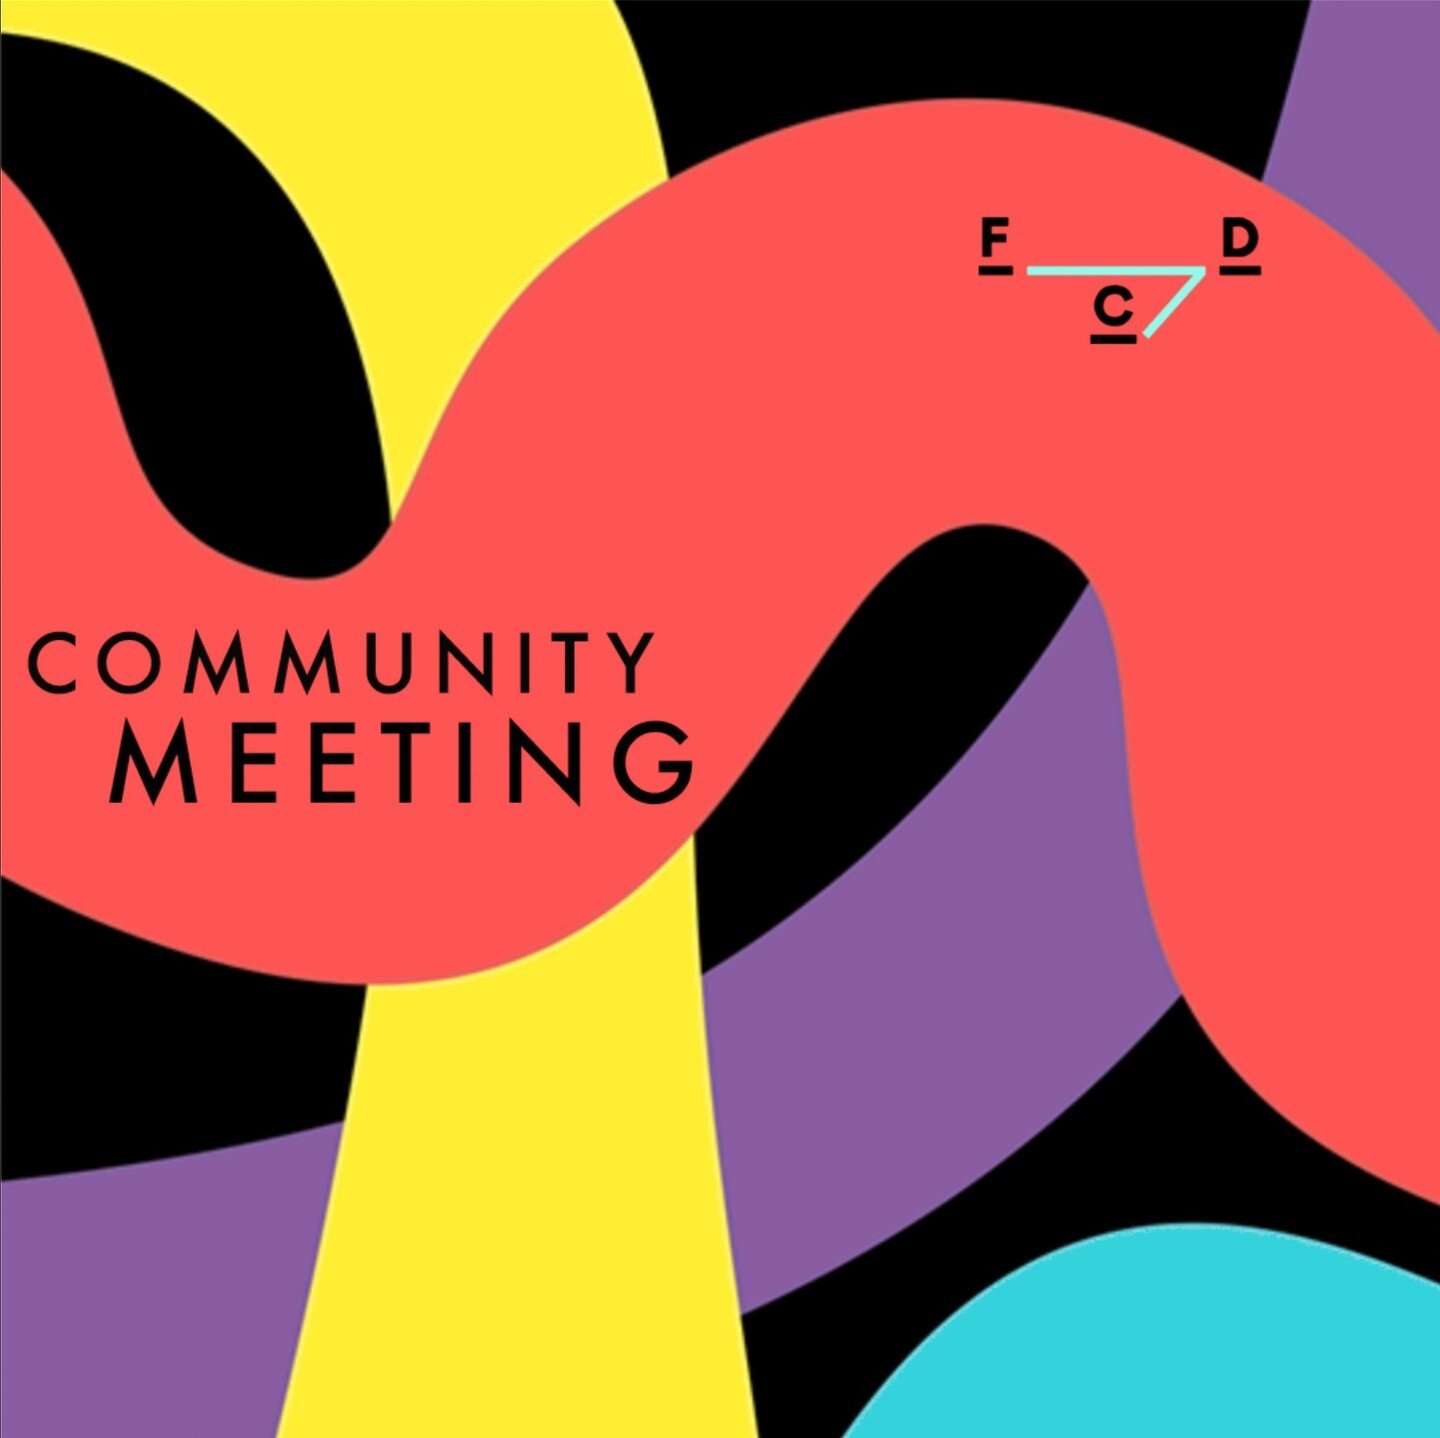 Monday Nov 14th, please join us for the next FDC online member Community Meeting (on Zoom). This is one of our most key connection events! Come meet new makers, and introduce your work!⁠
⁠
This is a member-only event that provides our community an op